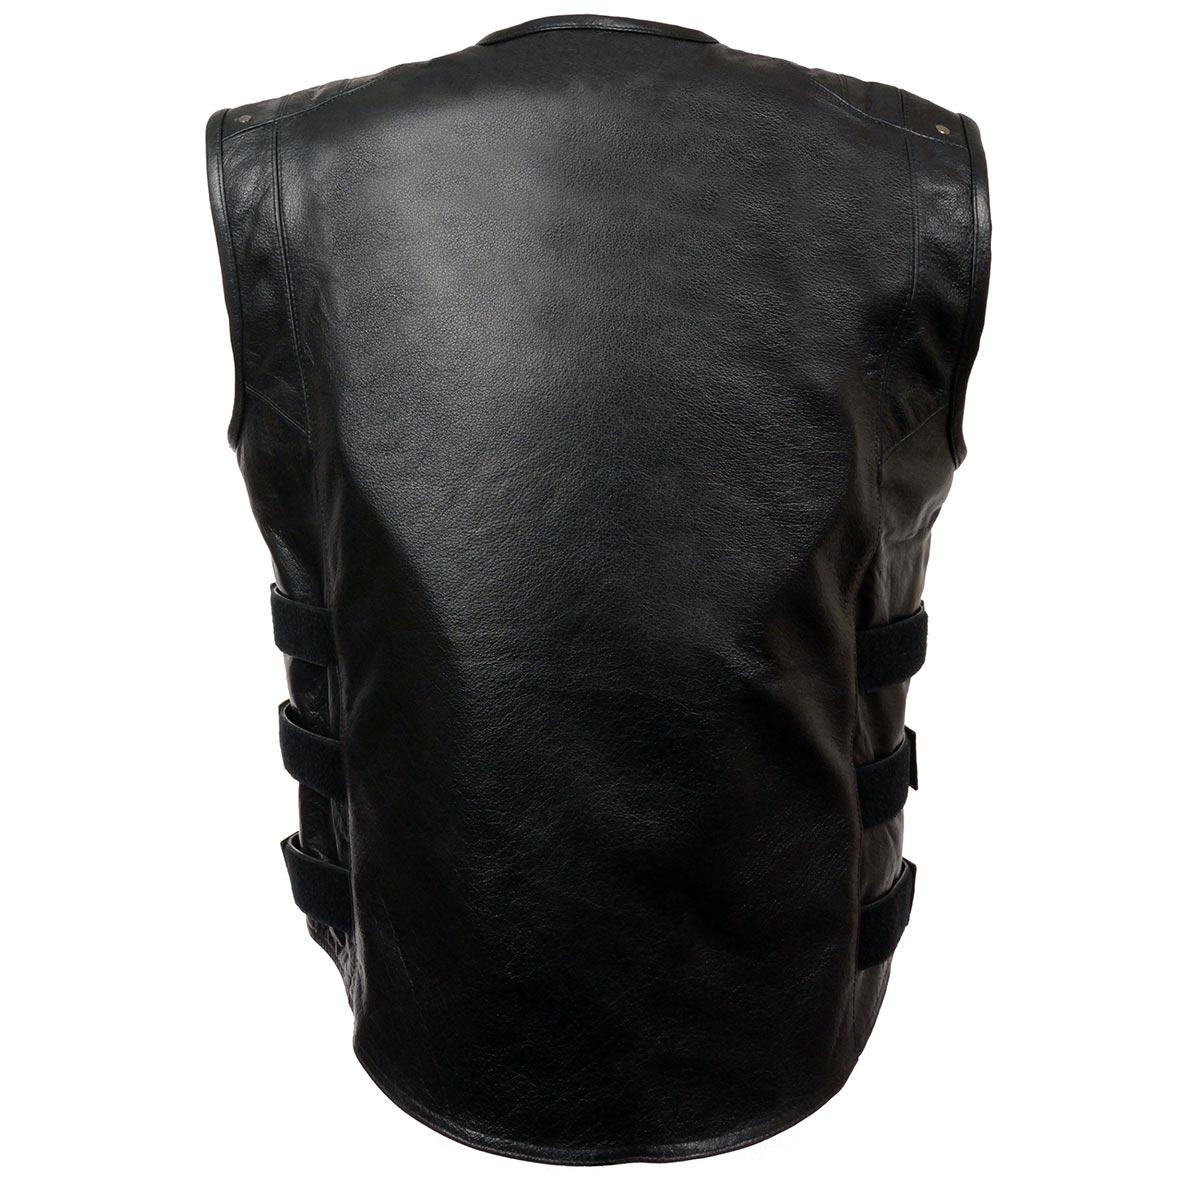 Milwaukee Leather MLM3530 Men's Black Leather SWAT Tactical Style Motorcycle Biker Rider Vest